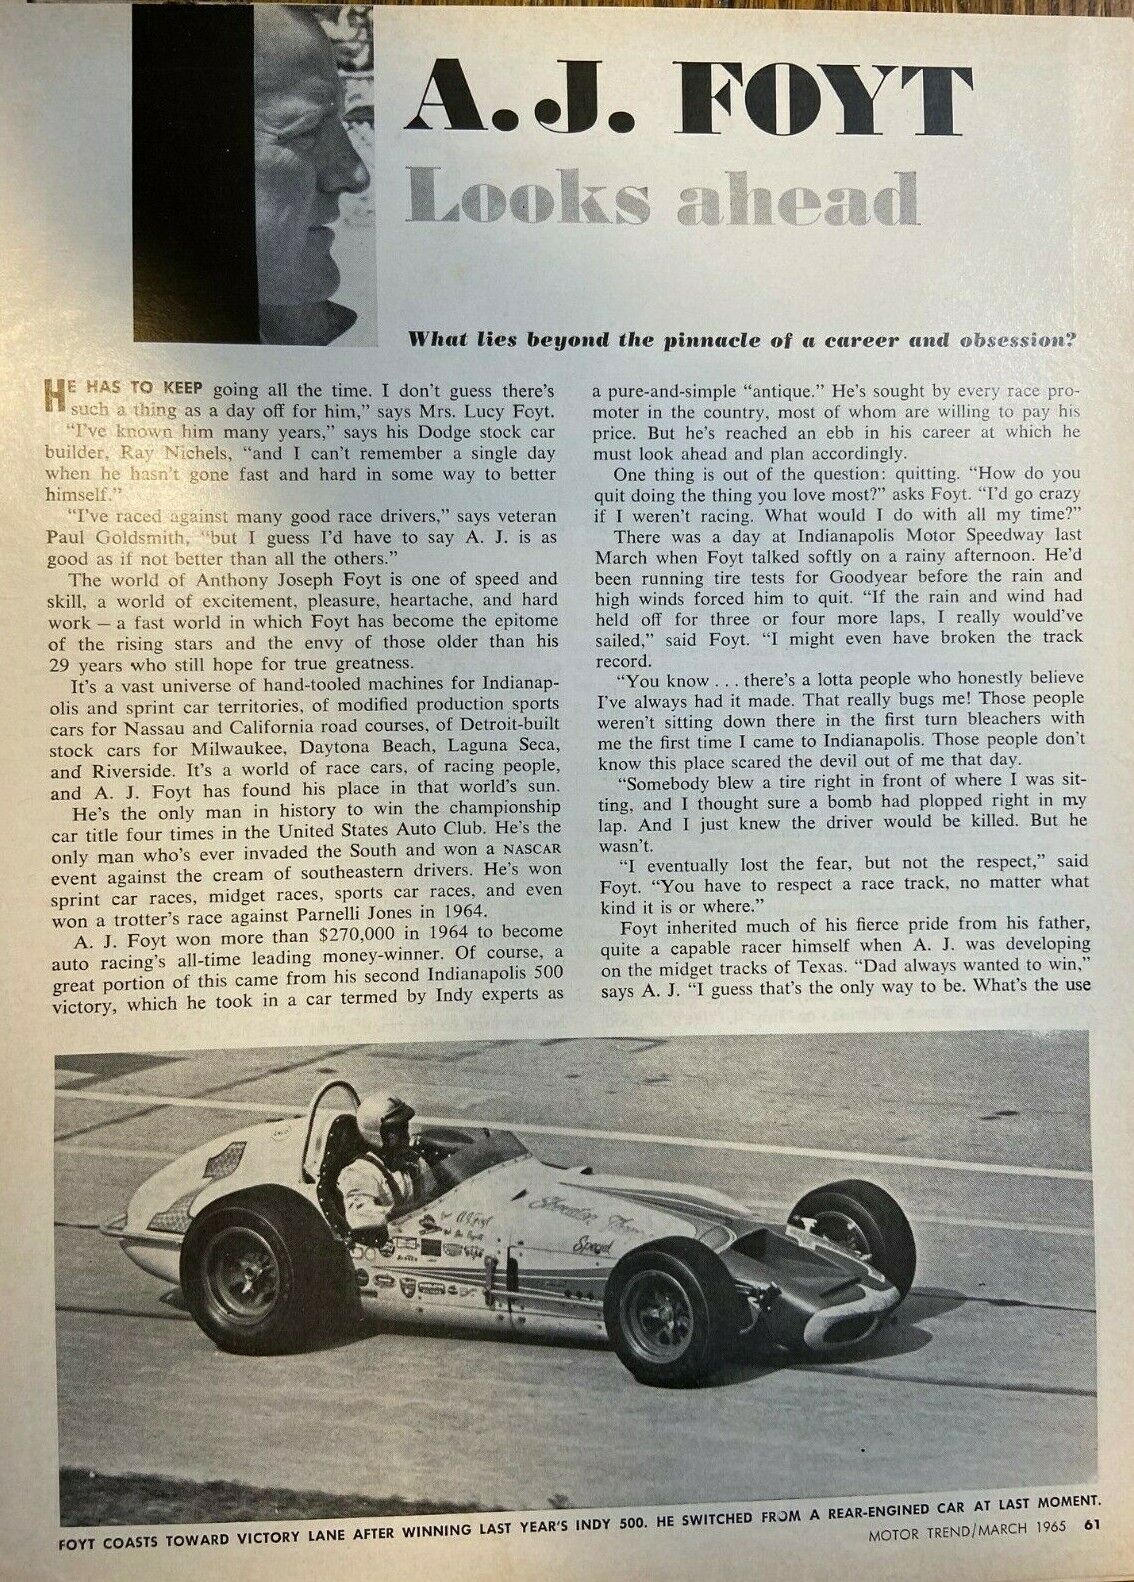 1965 Auto Racer A. J. Foyt illustrated